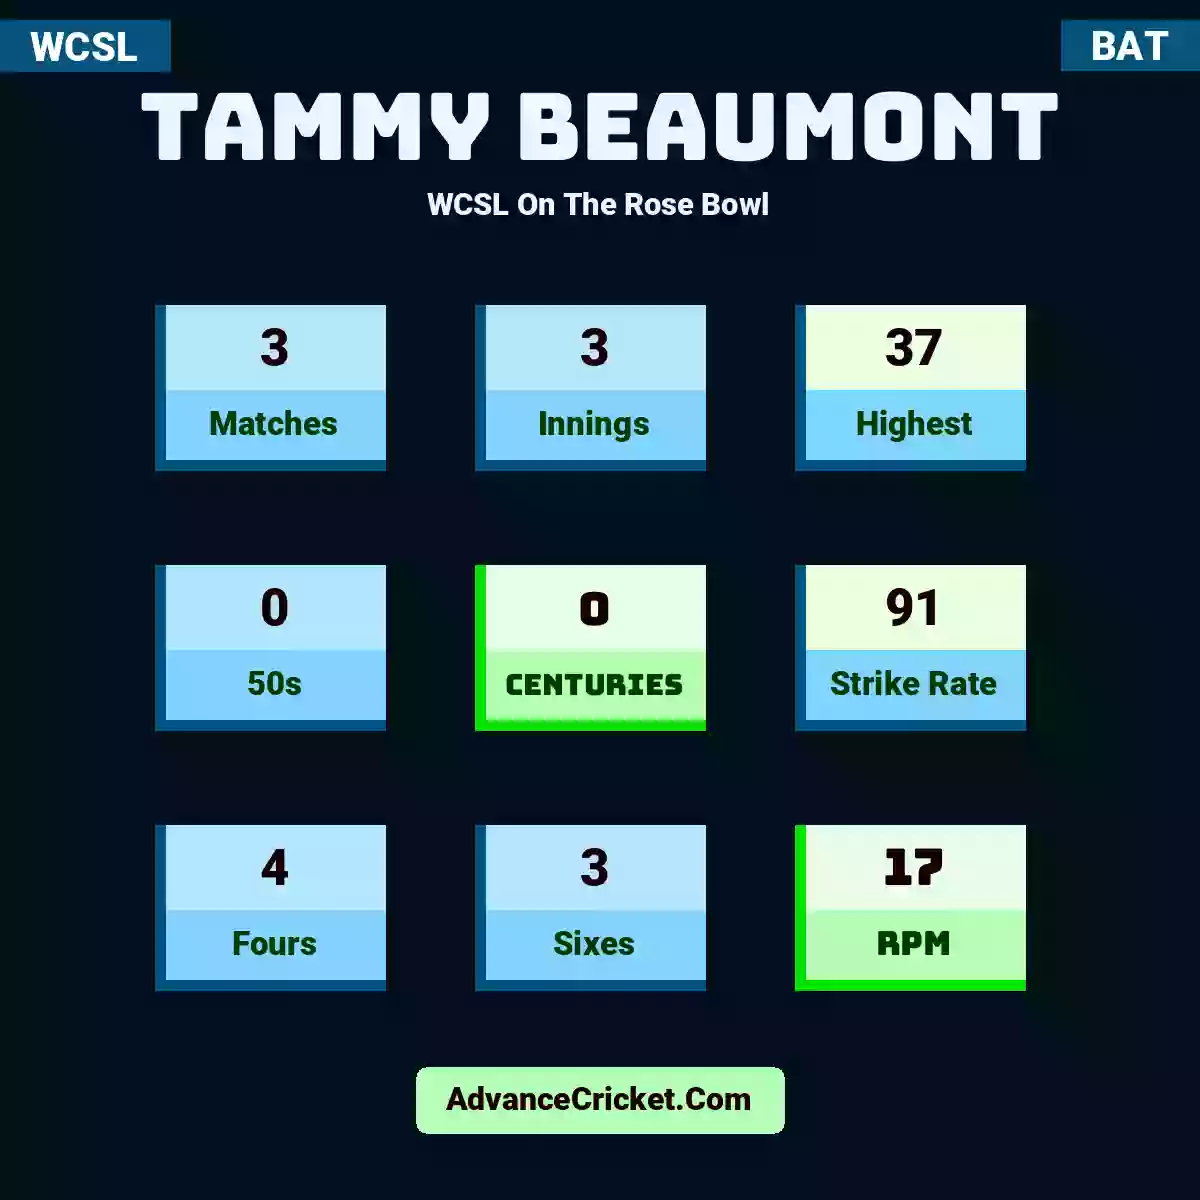 Tammy Beaumont WCSL  On The Rose Bowl, Tammy Beaumont played 3 matches, scored 37 runs as highest, 0 half-centuries, and 0 centuries, with a strike rate of 91. T.Beaumont hit 4 fours and 3 sixes, with an RPM of 17.